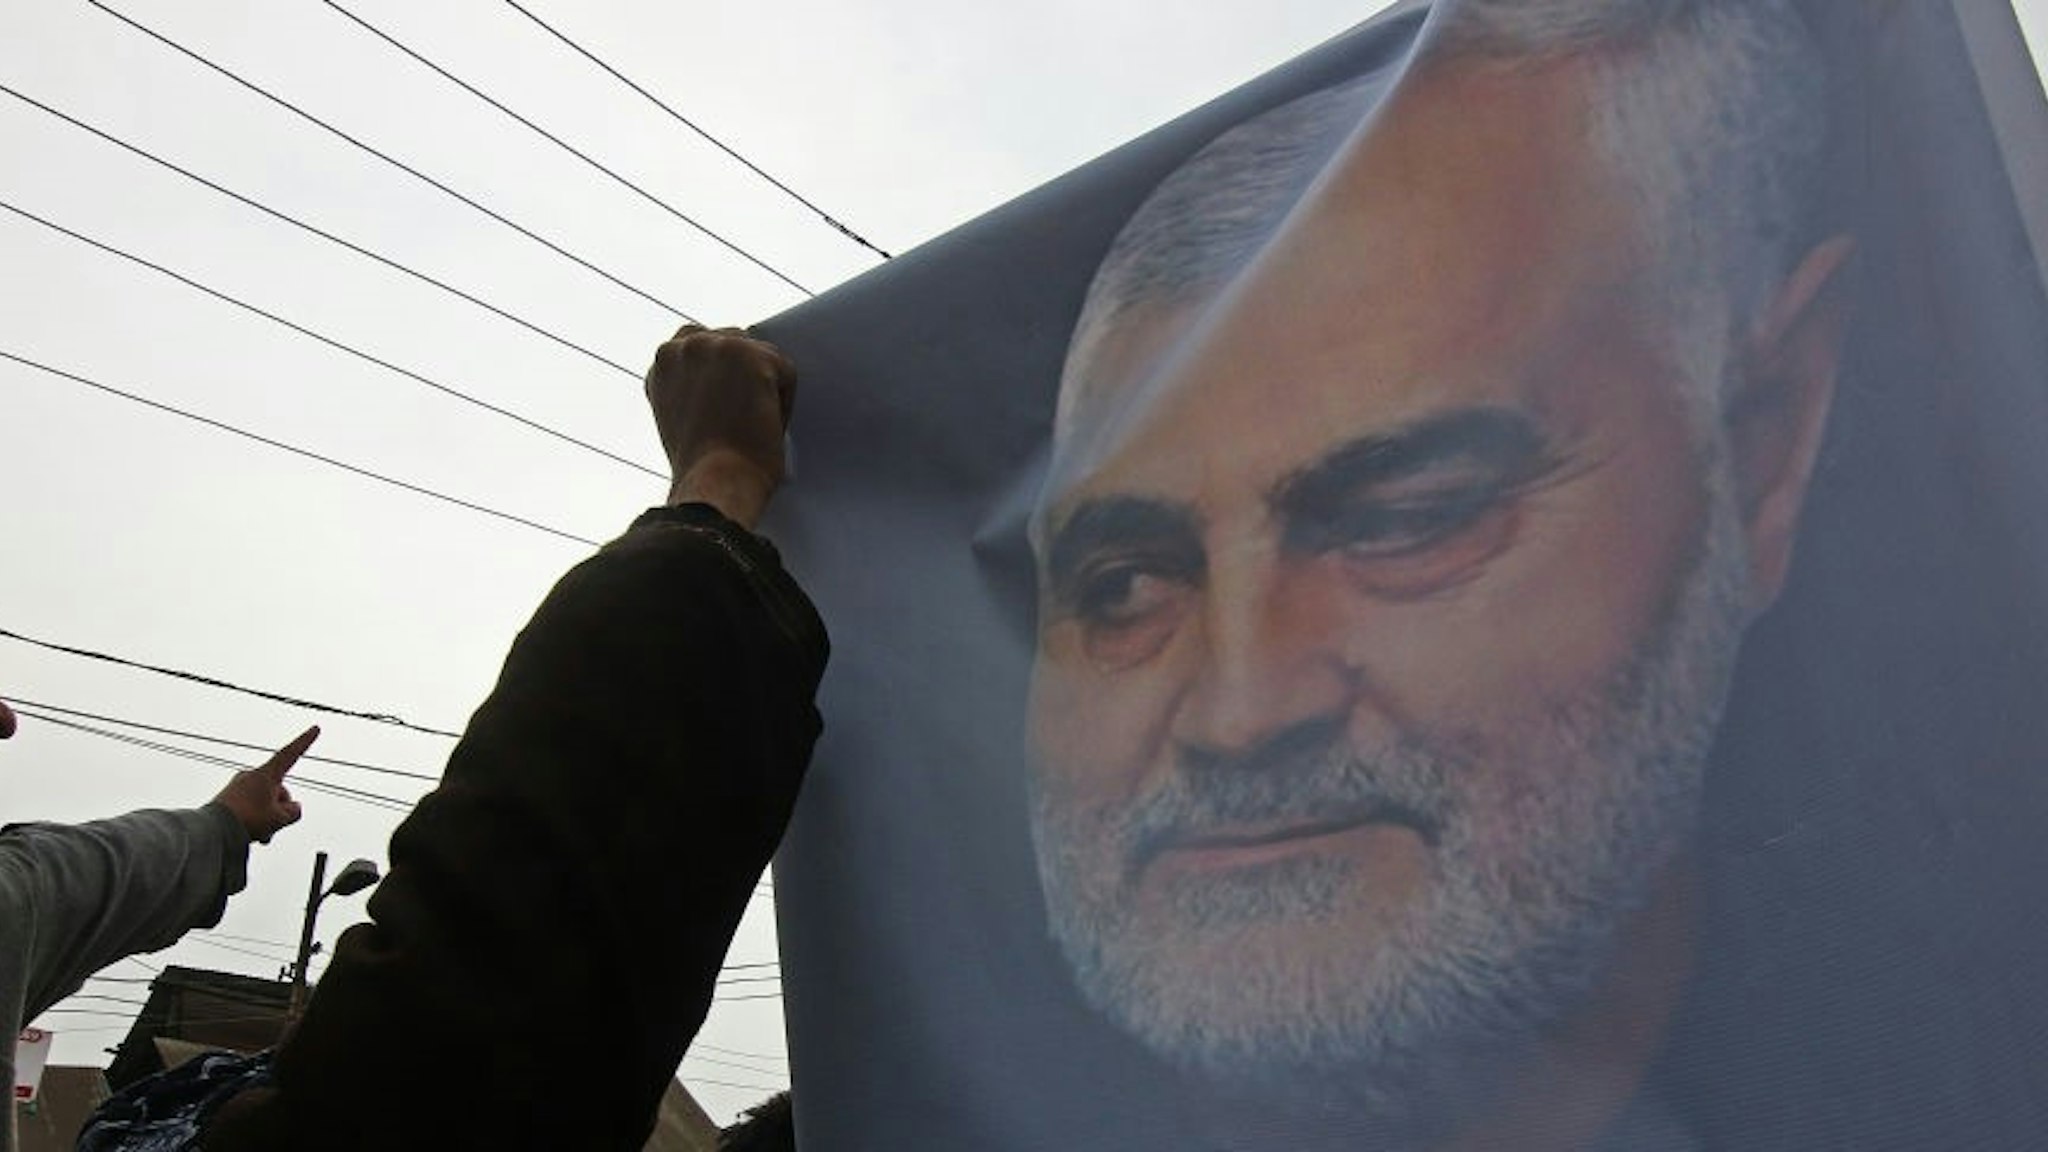 A Kashmiri Shiite muslim holds a picture of Iranian military General Qassem Soleimani as he marches during an anti-America protest in central Kashmir on January 03, 2020.The agitated protesters were chanting anti-America slogans and staged a protest against the killing of Soleimani by a US air strike in Baghdad.